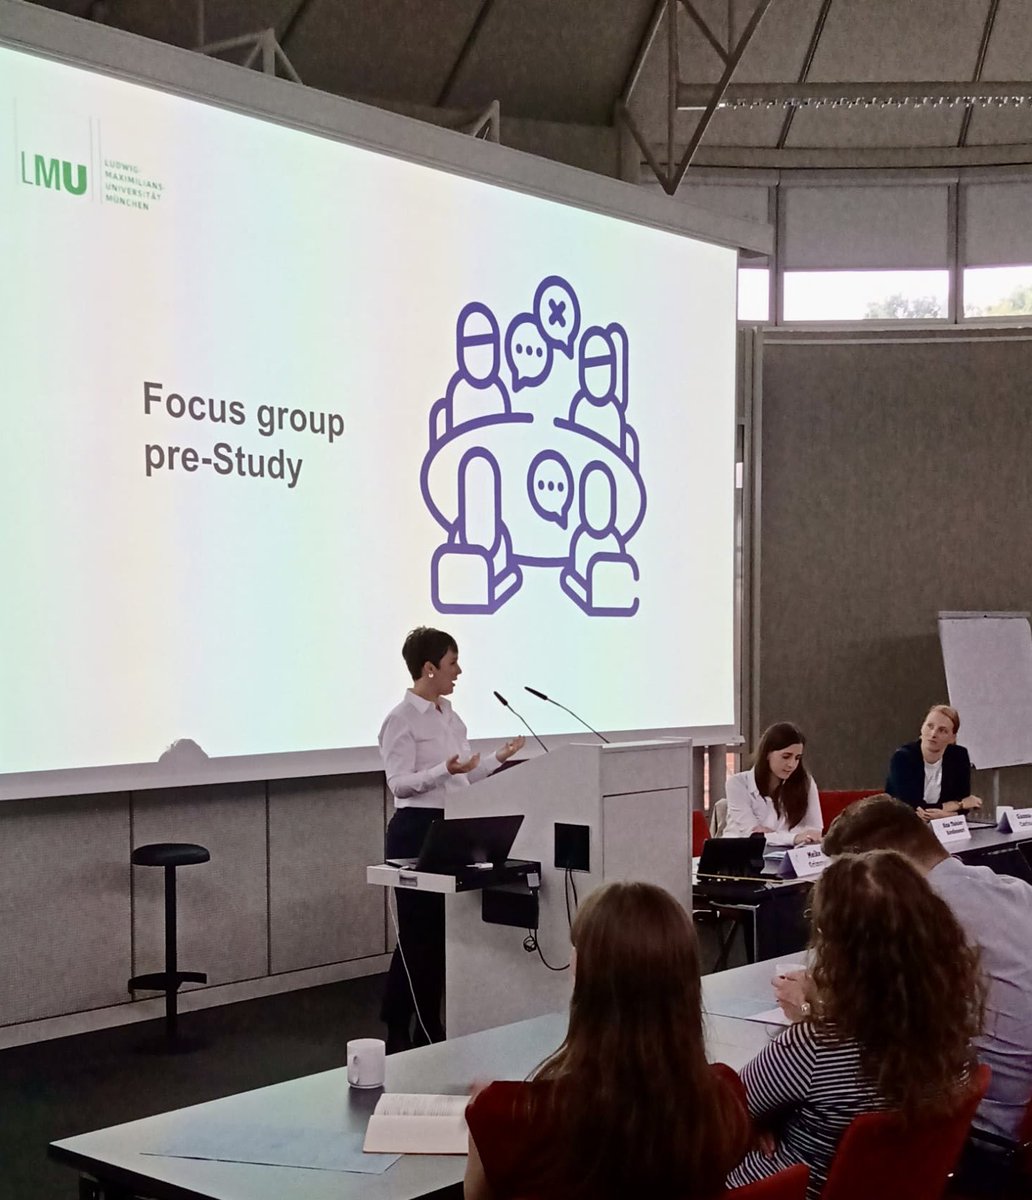 It was such a pleasure to present our team’s (@neilthurman, @fstalph, @ifkw_lmu) research at #scicar23 alongside @giannagruen, @theresakoerner_ and Meike Grimme! Thanks to @TU_Dortmund @wpk_daily @smc_germany @nrecherche and @VolkswagenSt